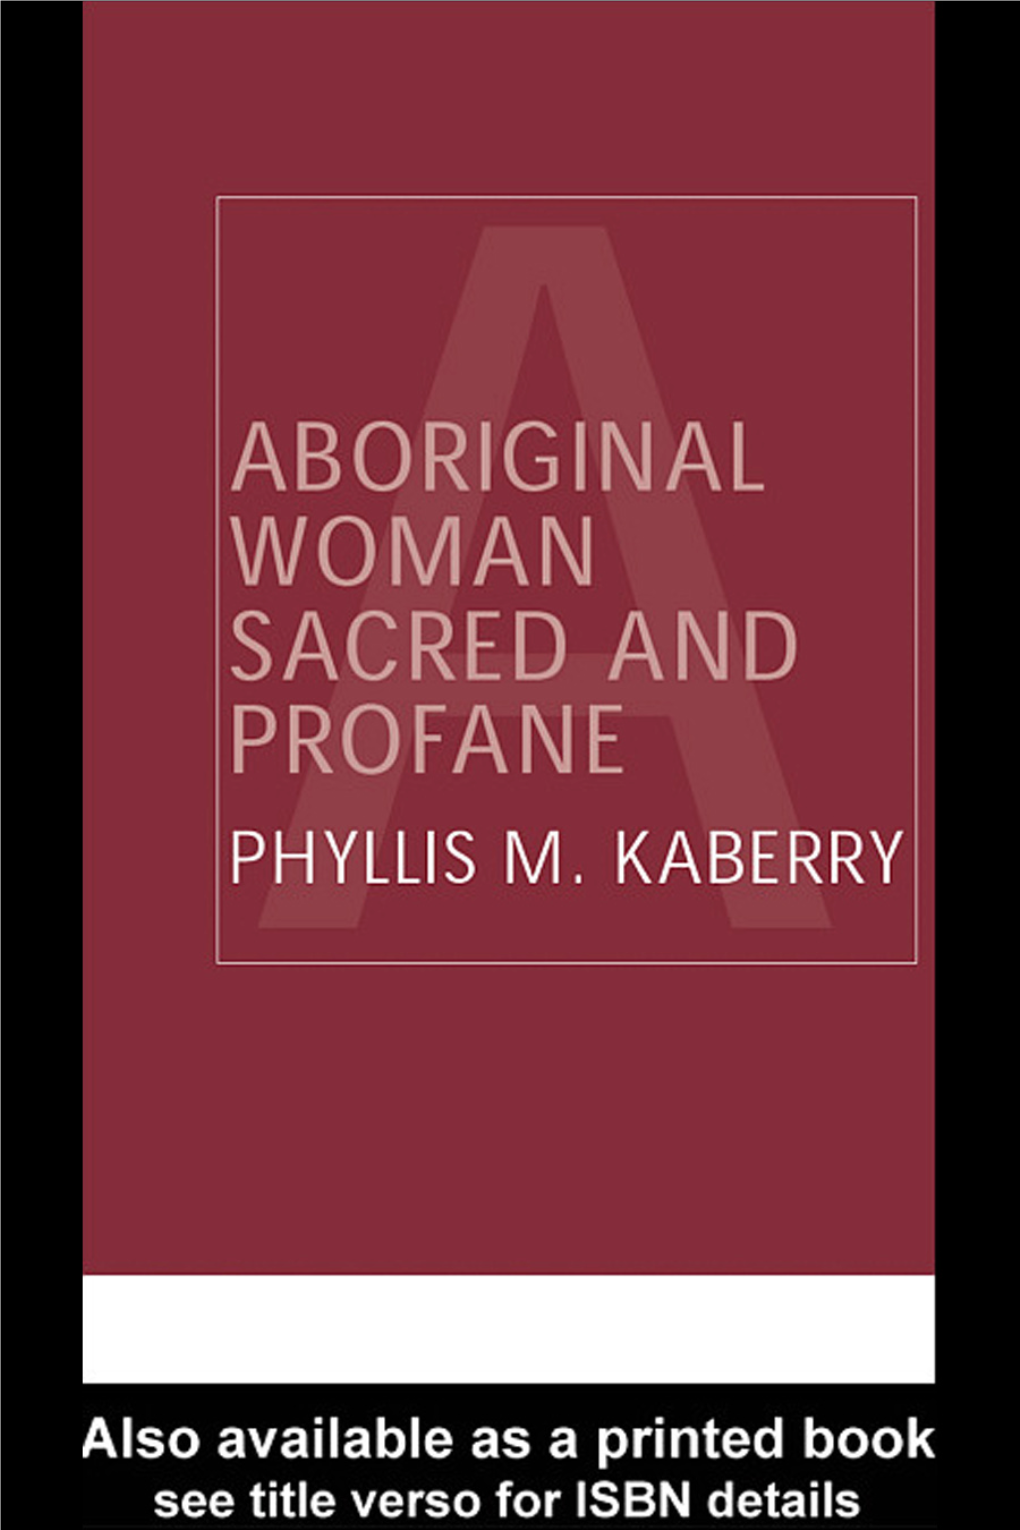 Aboriginal Woman Sacred and Profane Illustrates the Importance of the Study of Gender in Anthropology